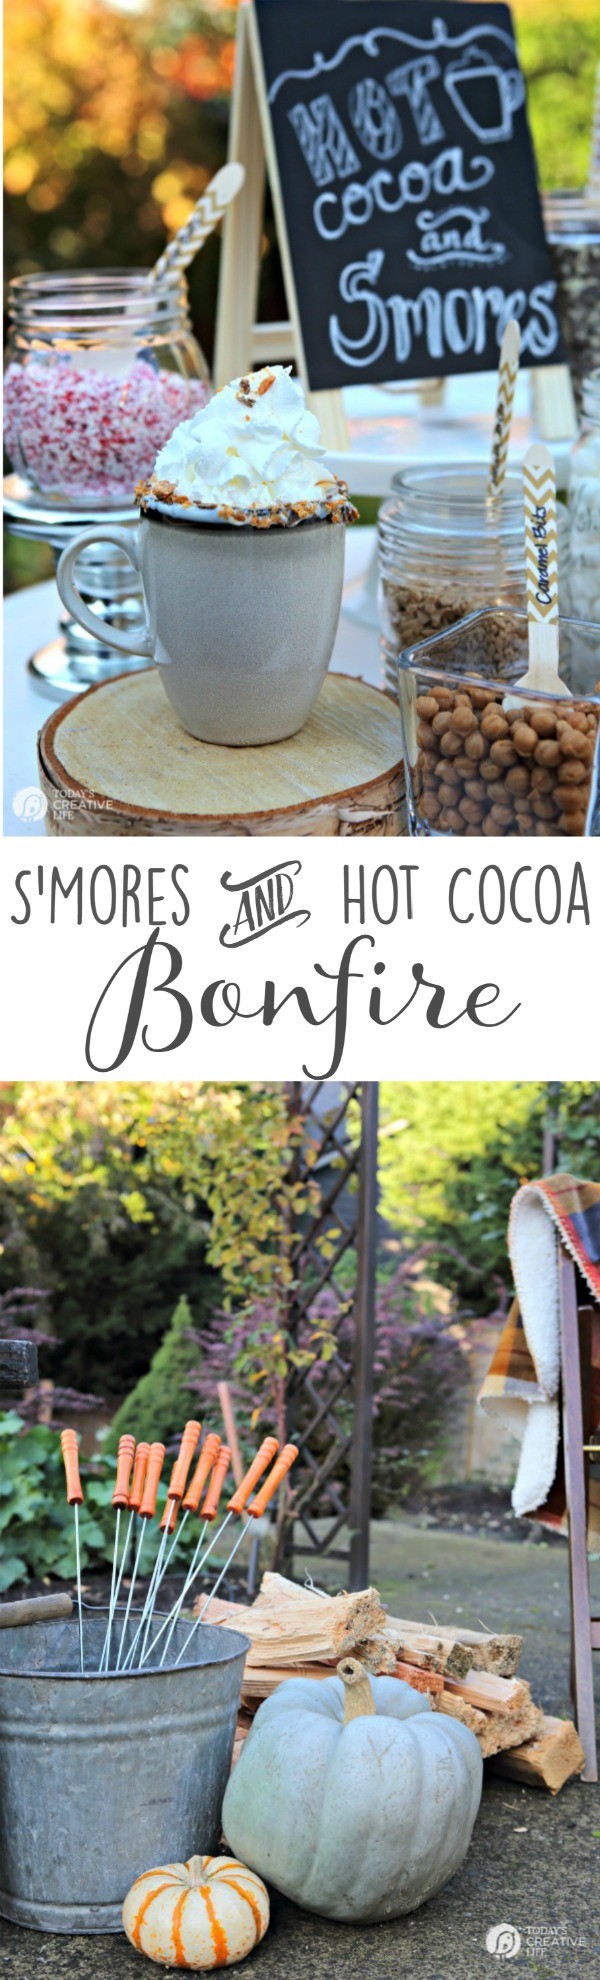 S'Mores and Hot Cocoa Bonfire Backyard Party | Today's ...